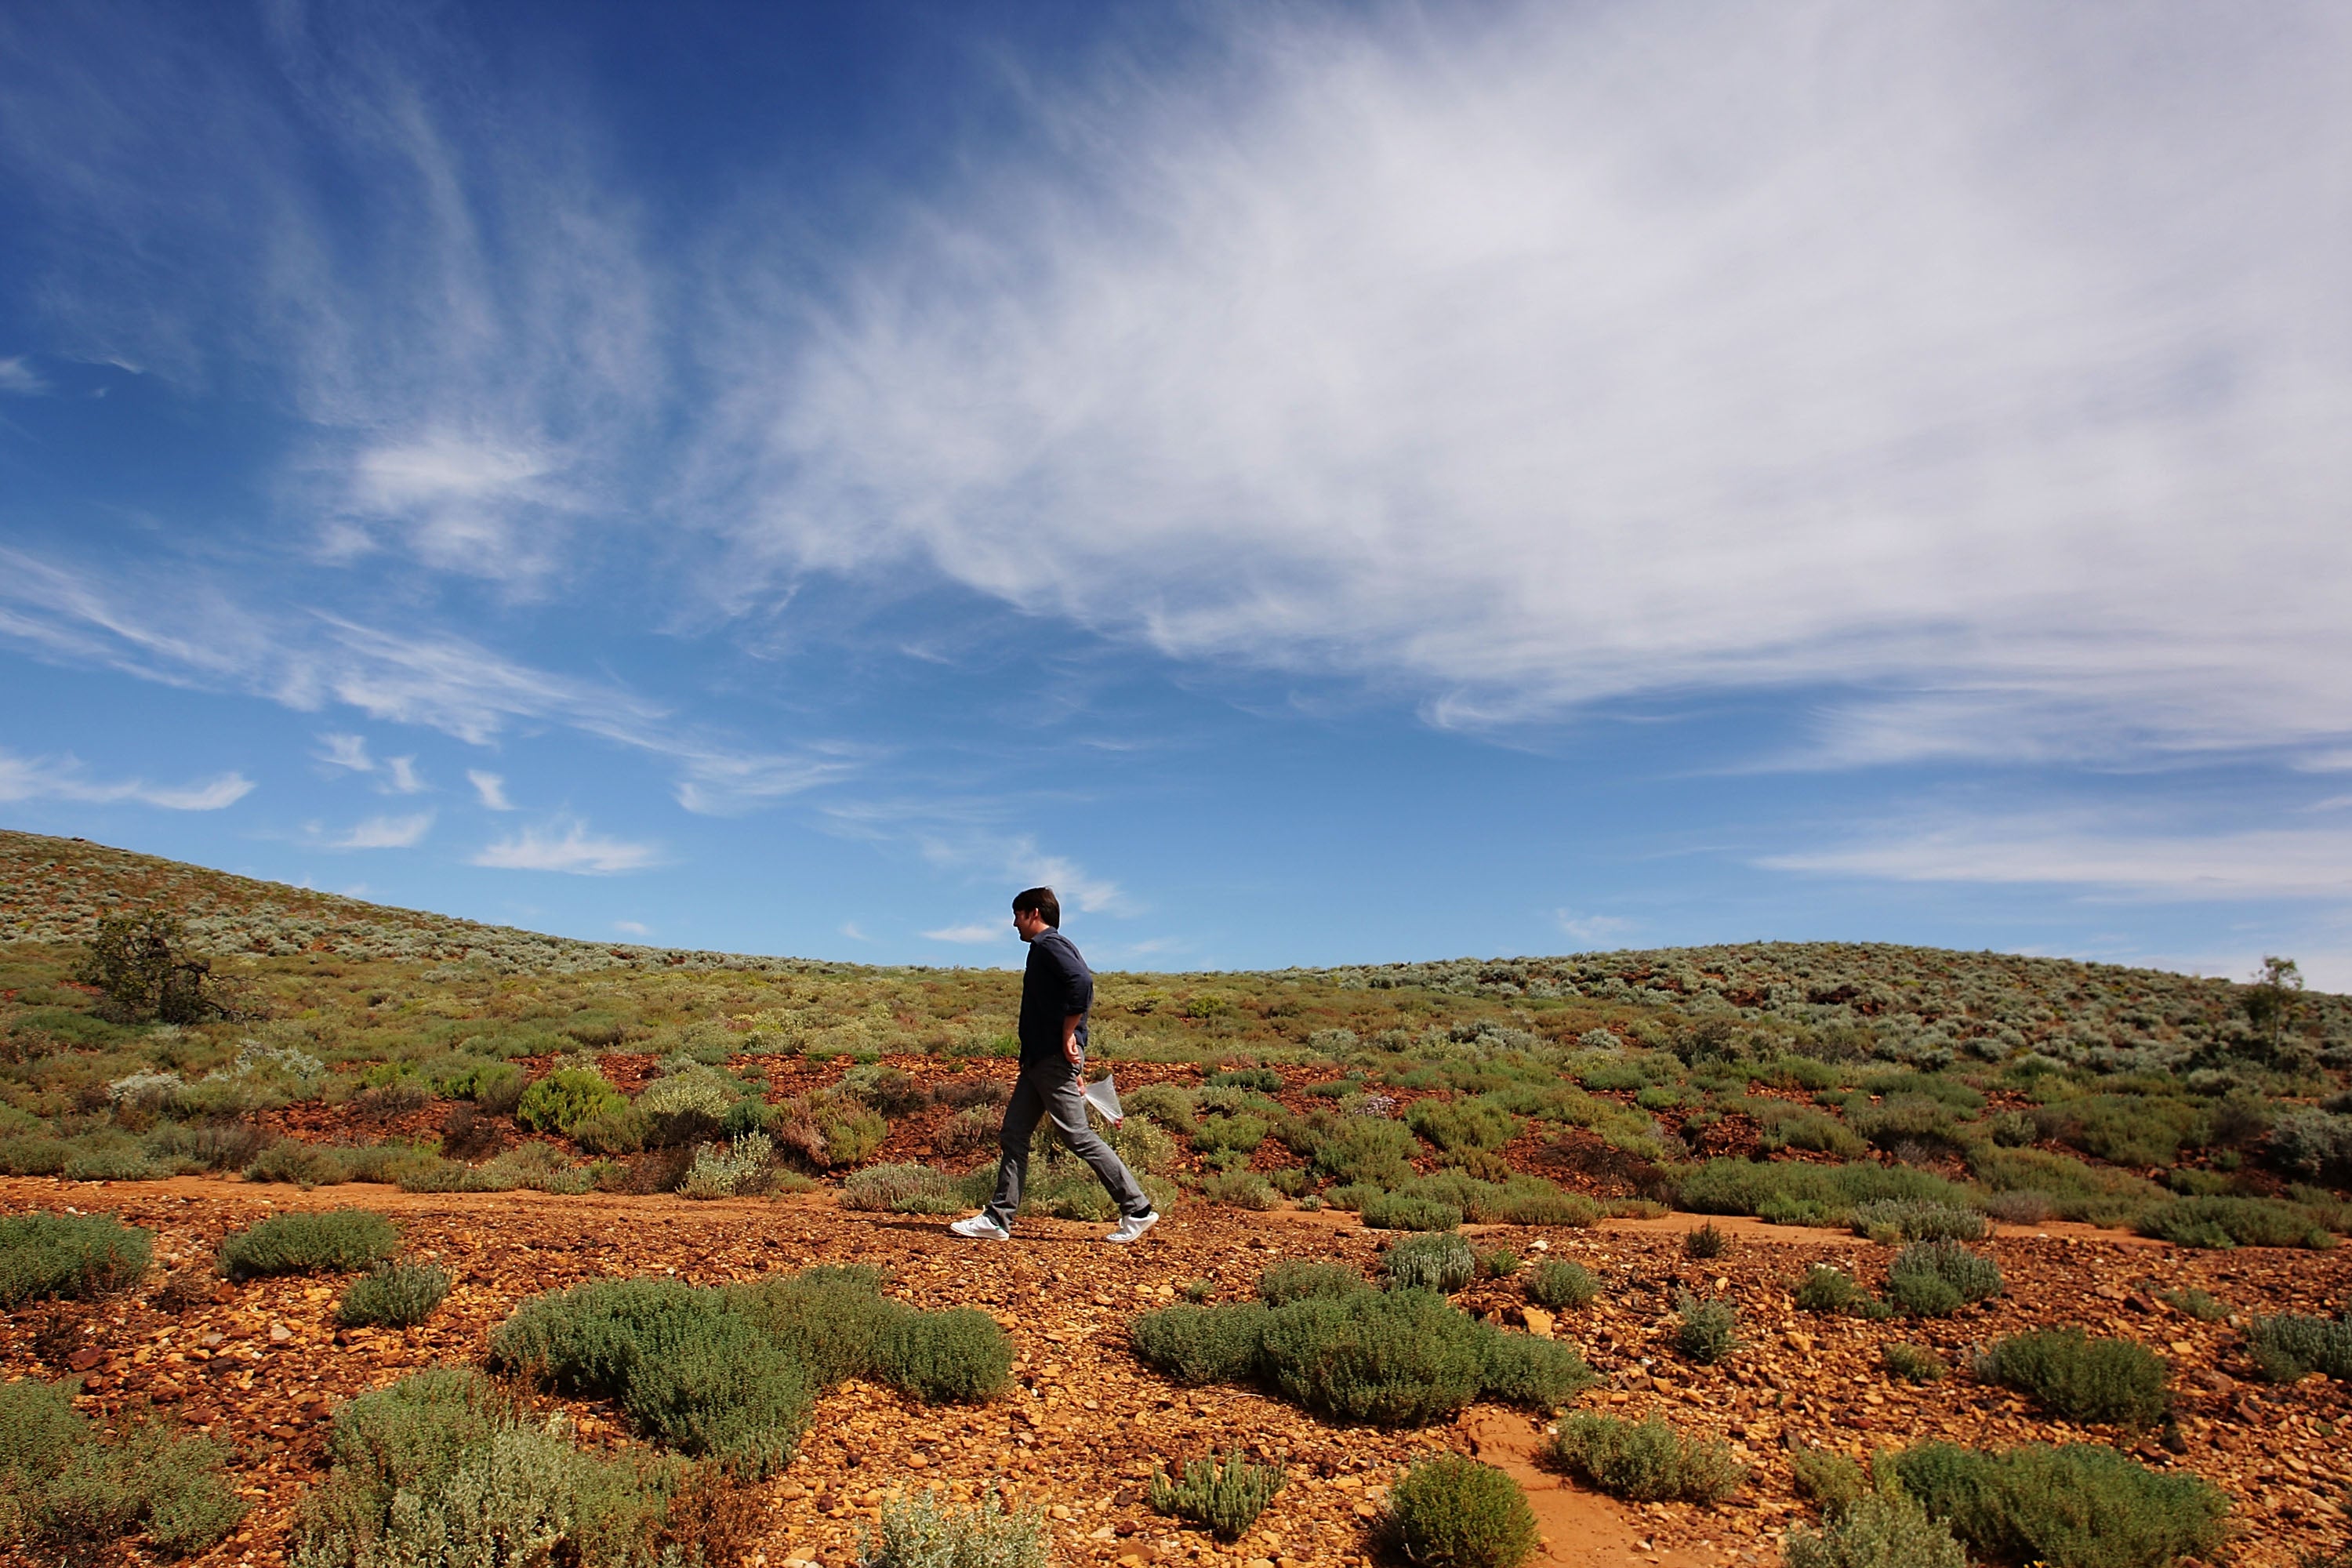 Rene Redzepi forages for food during a visit to Nepabunna land in the South Australian Outback